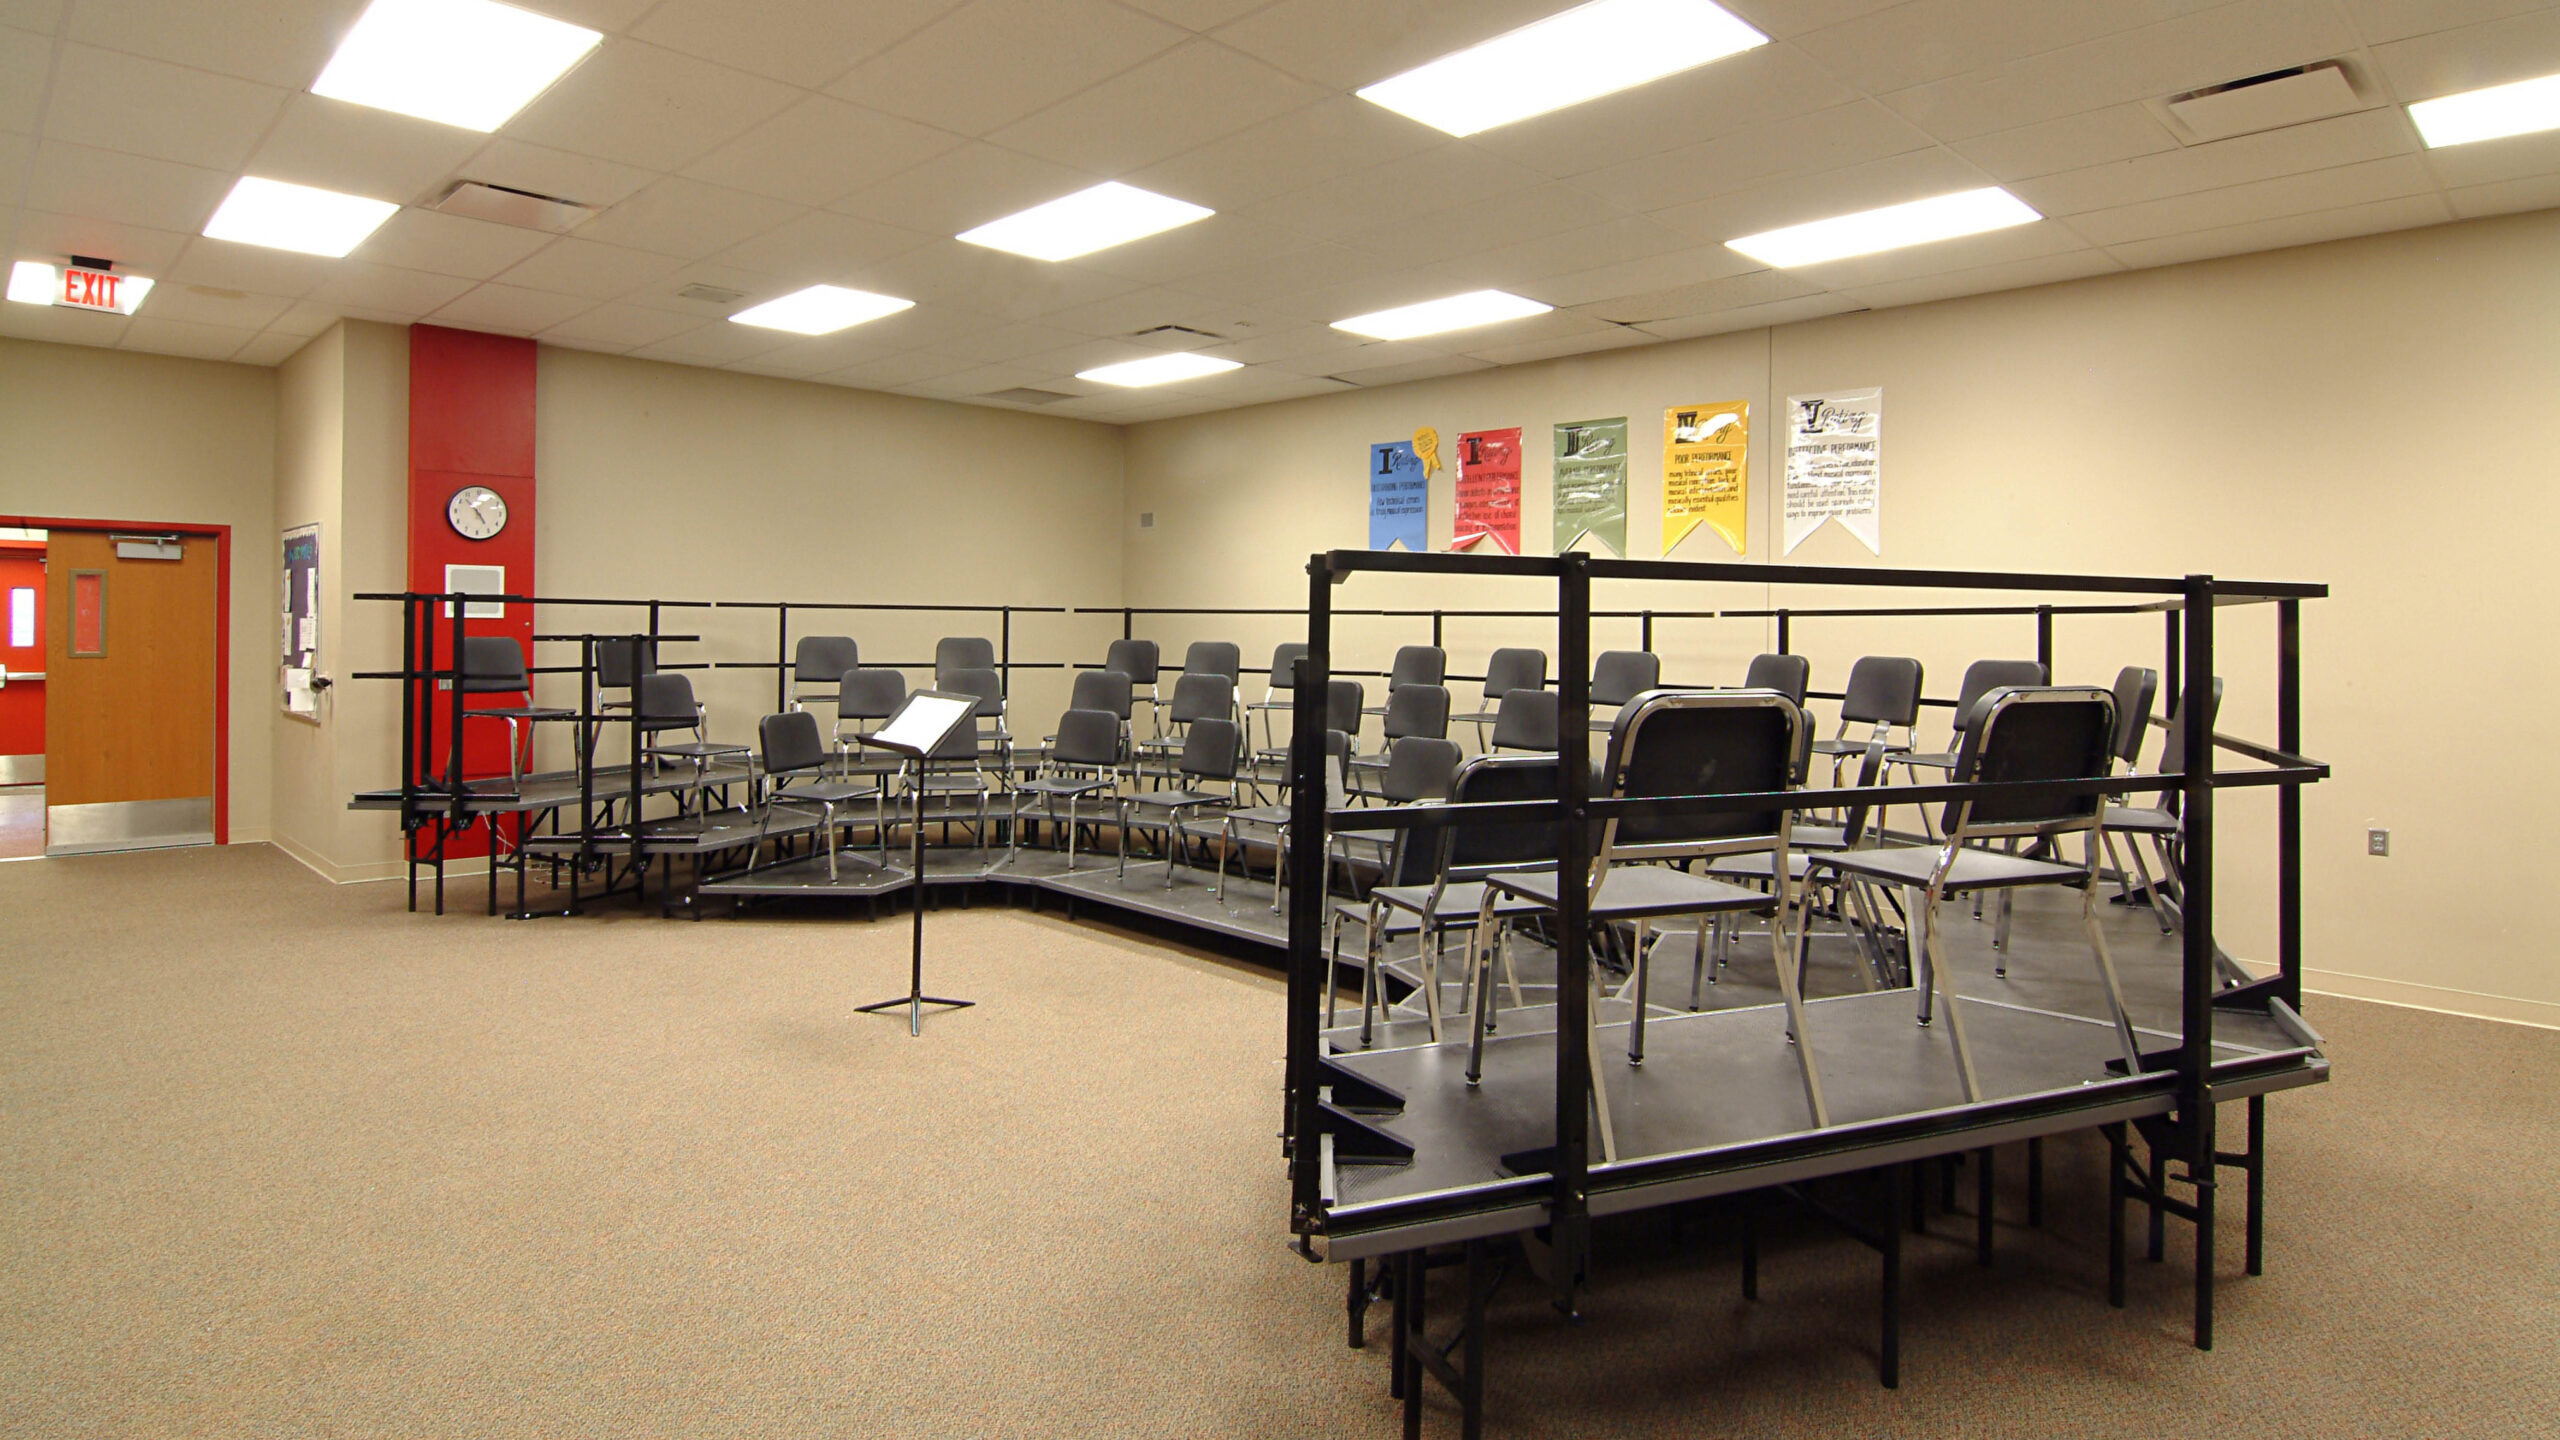 choir room with risers and chairs